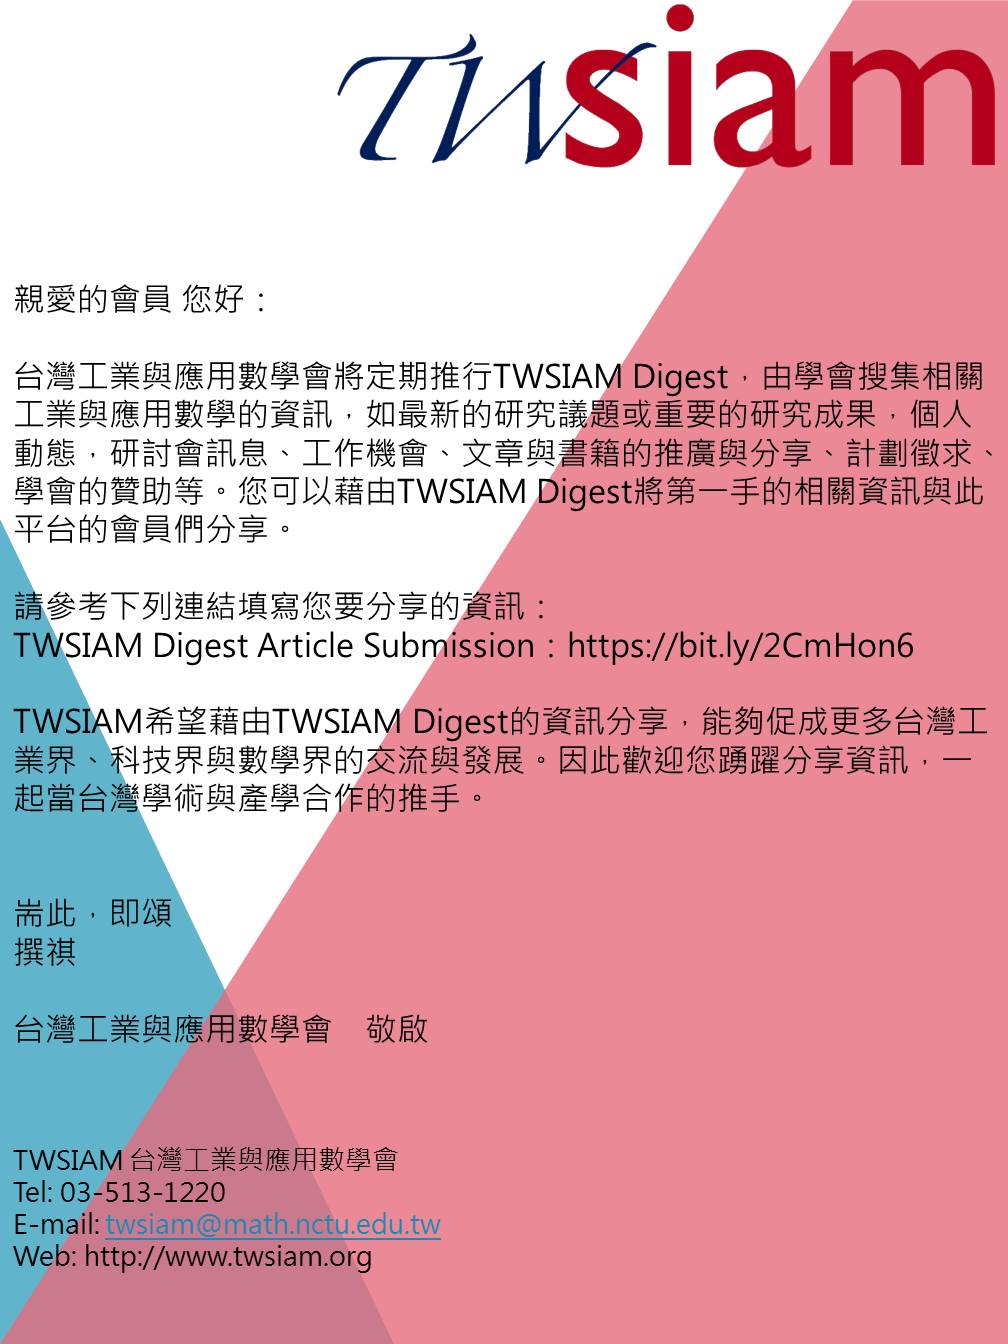 TWSIAM Digest Article Submission